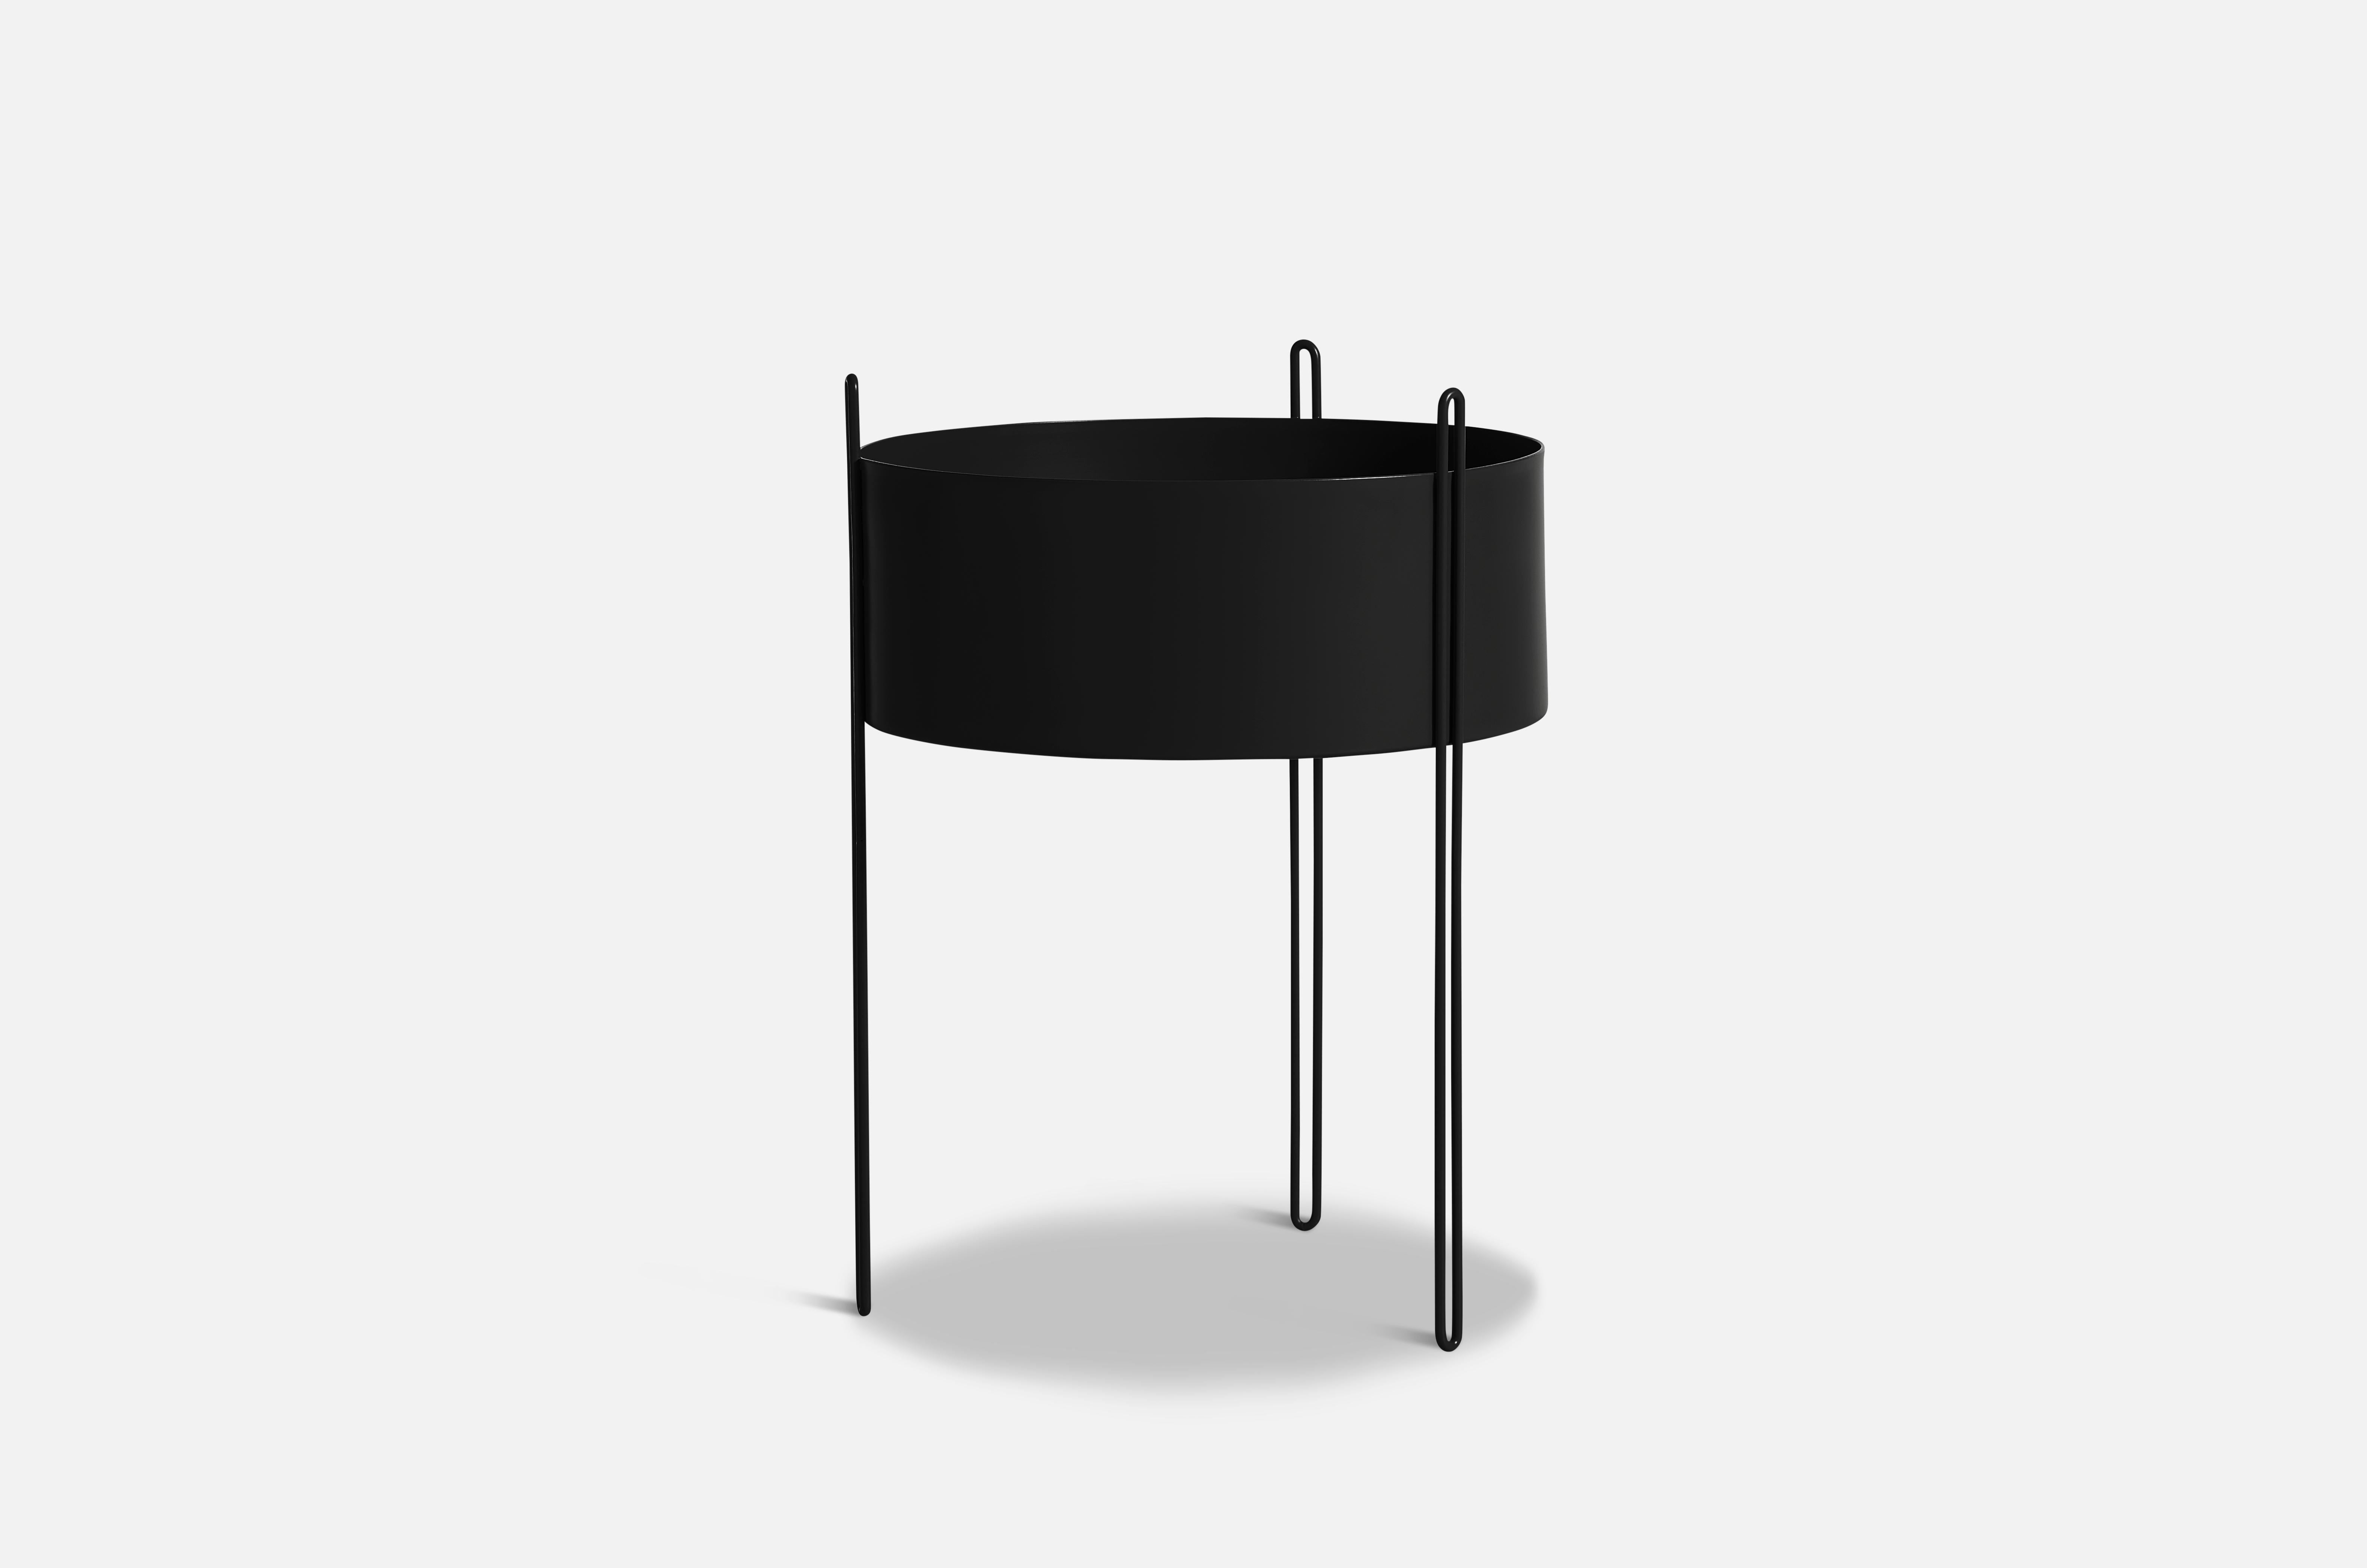 Large Black Pidestall planter by Emilie Stahl Carlsen
Materials: Metal.
Dimensions: D 40 x H 55 cm
Available in grey, red, taupe or black and in 3 sizes: D15 x H15, D40 x H35, D40 x H55 cm.

Emilie Stahl Carlsen is a Nor wegian designer who